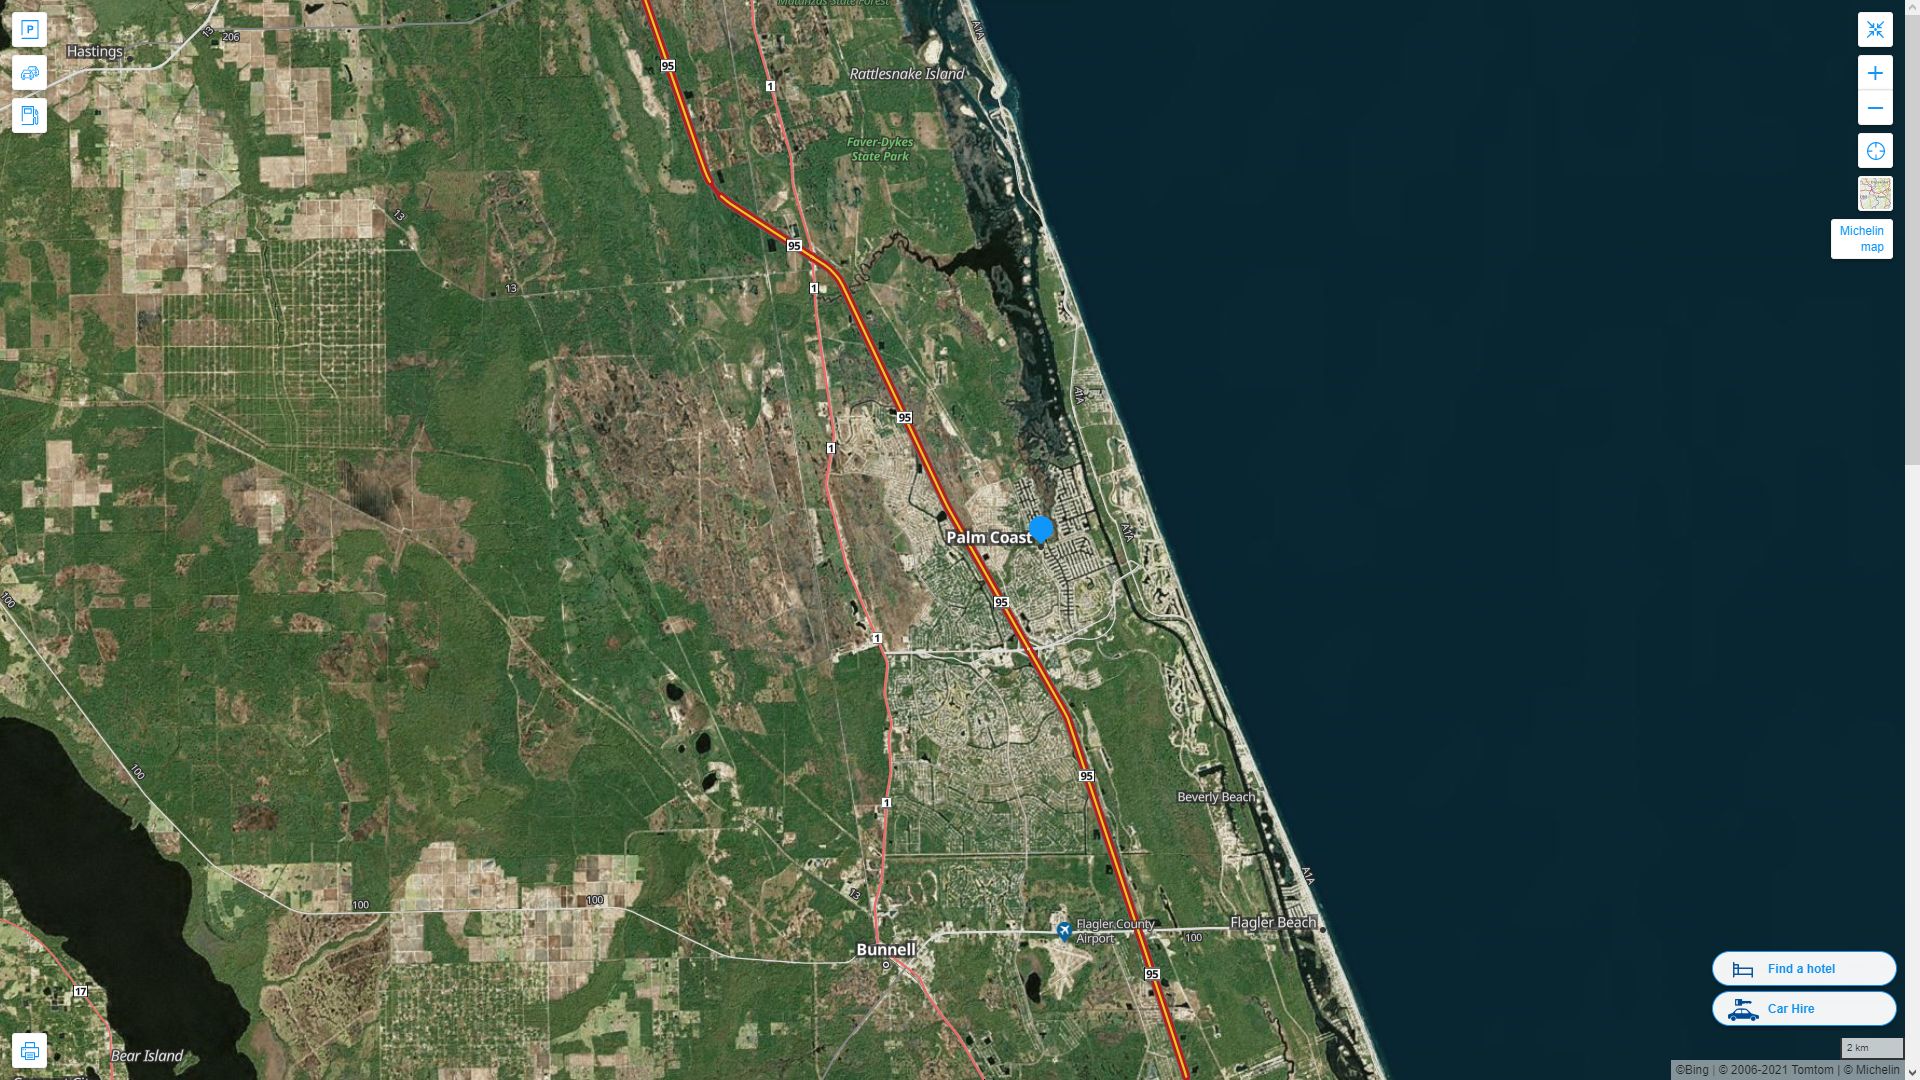 Palm Coast Florida Highway and Road Map with Satellite View